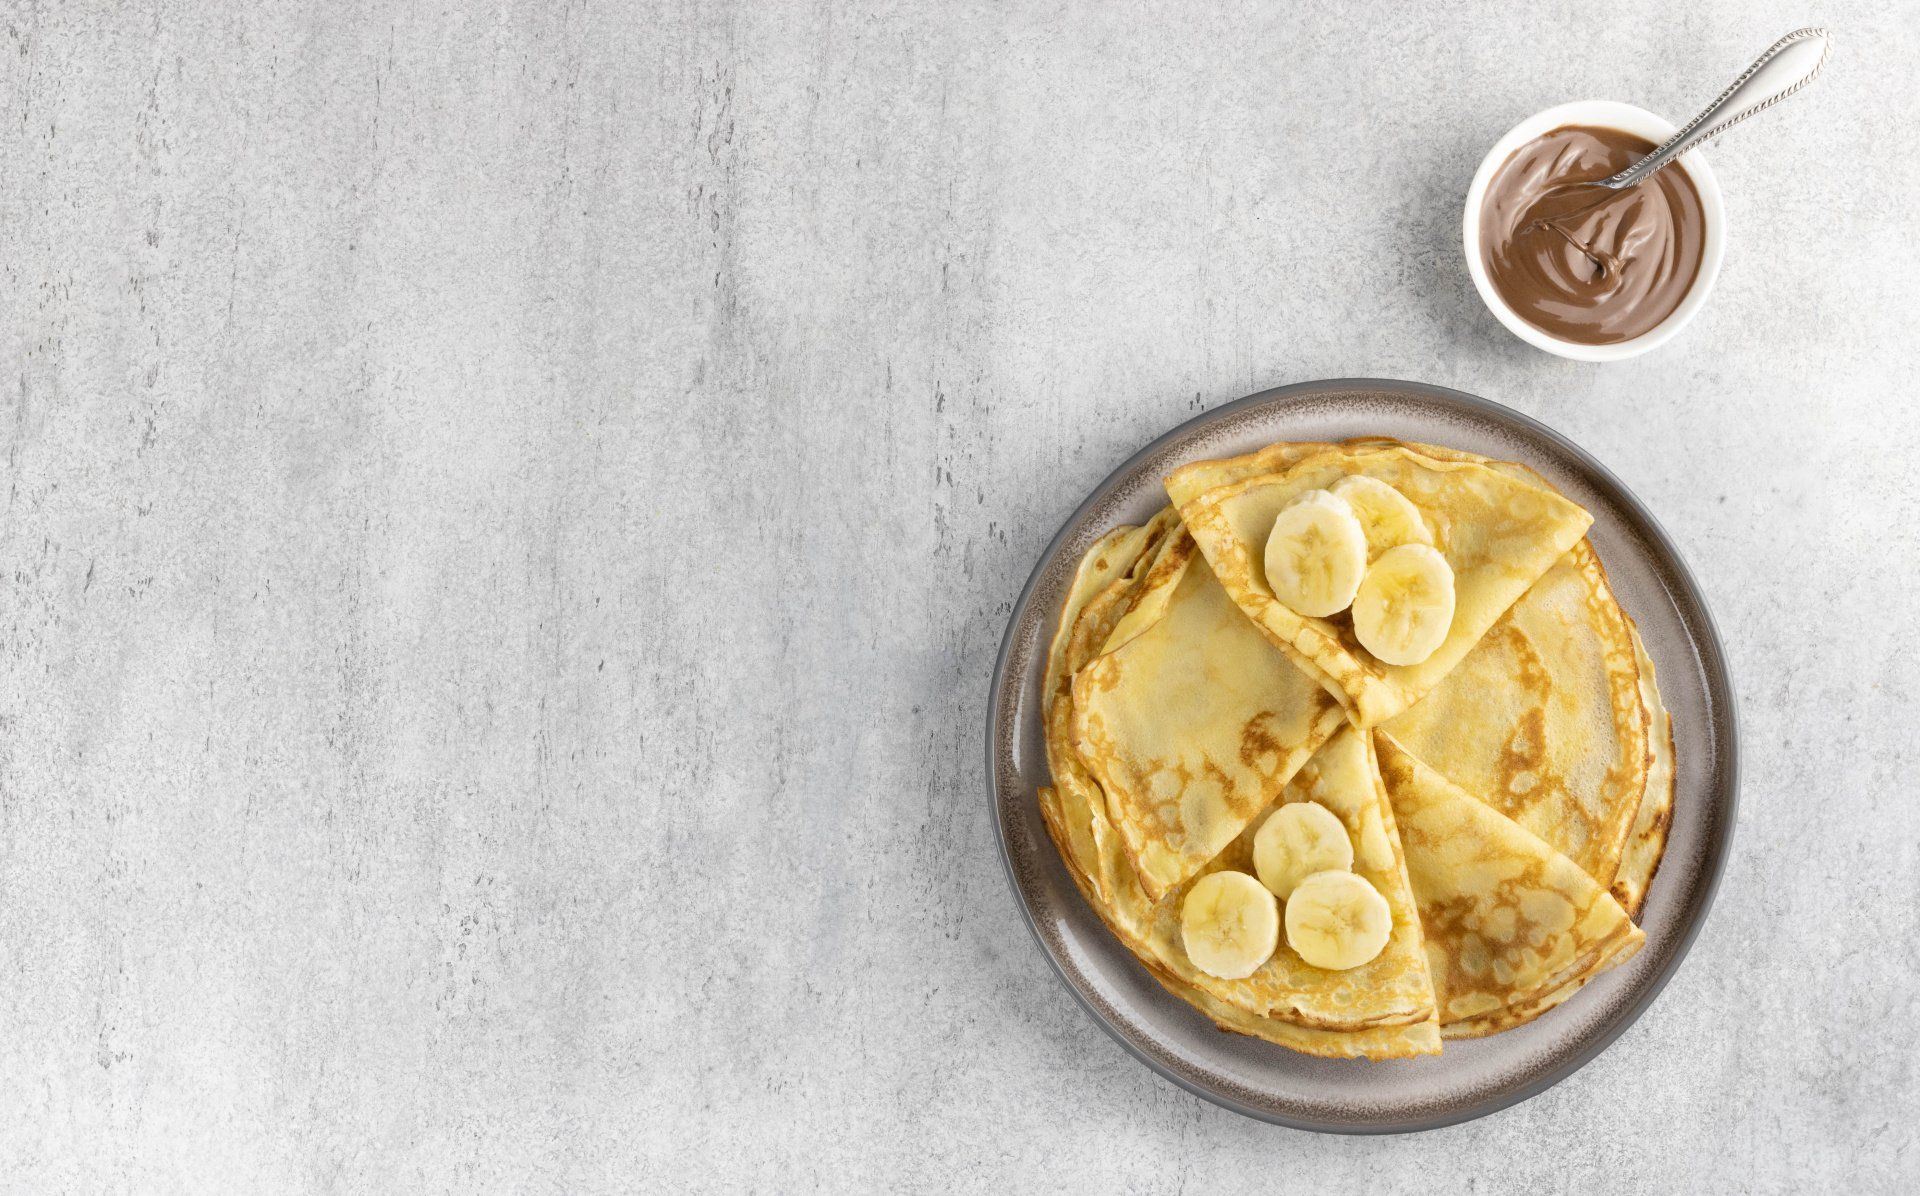 pancake on a round dish topped with sliced bananas. in a seperate bowel is melted chocolate with a silver spoon stuck out,